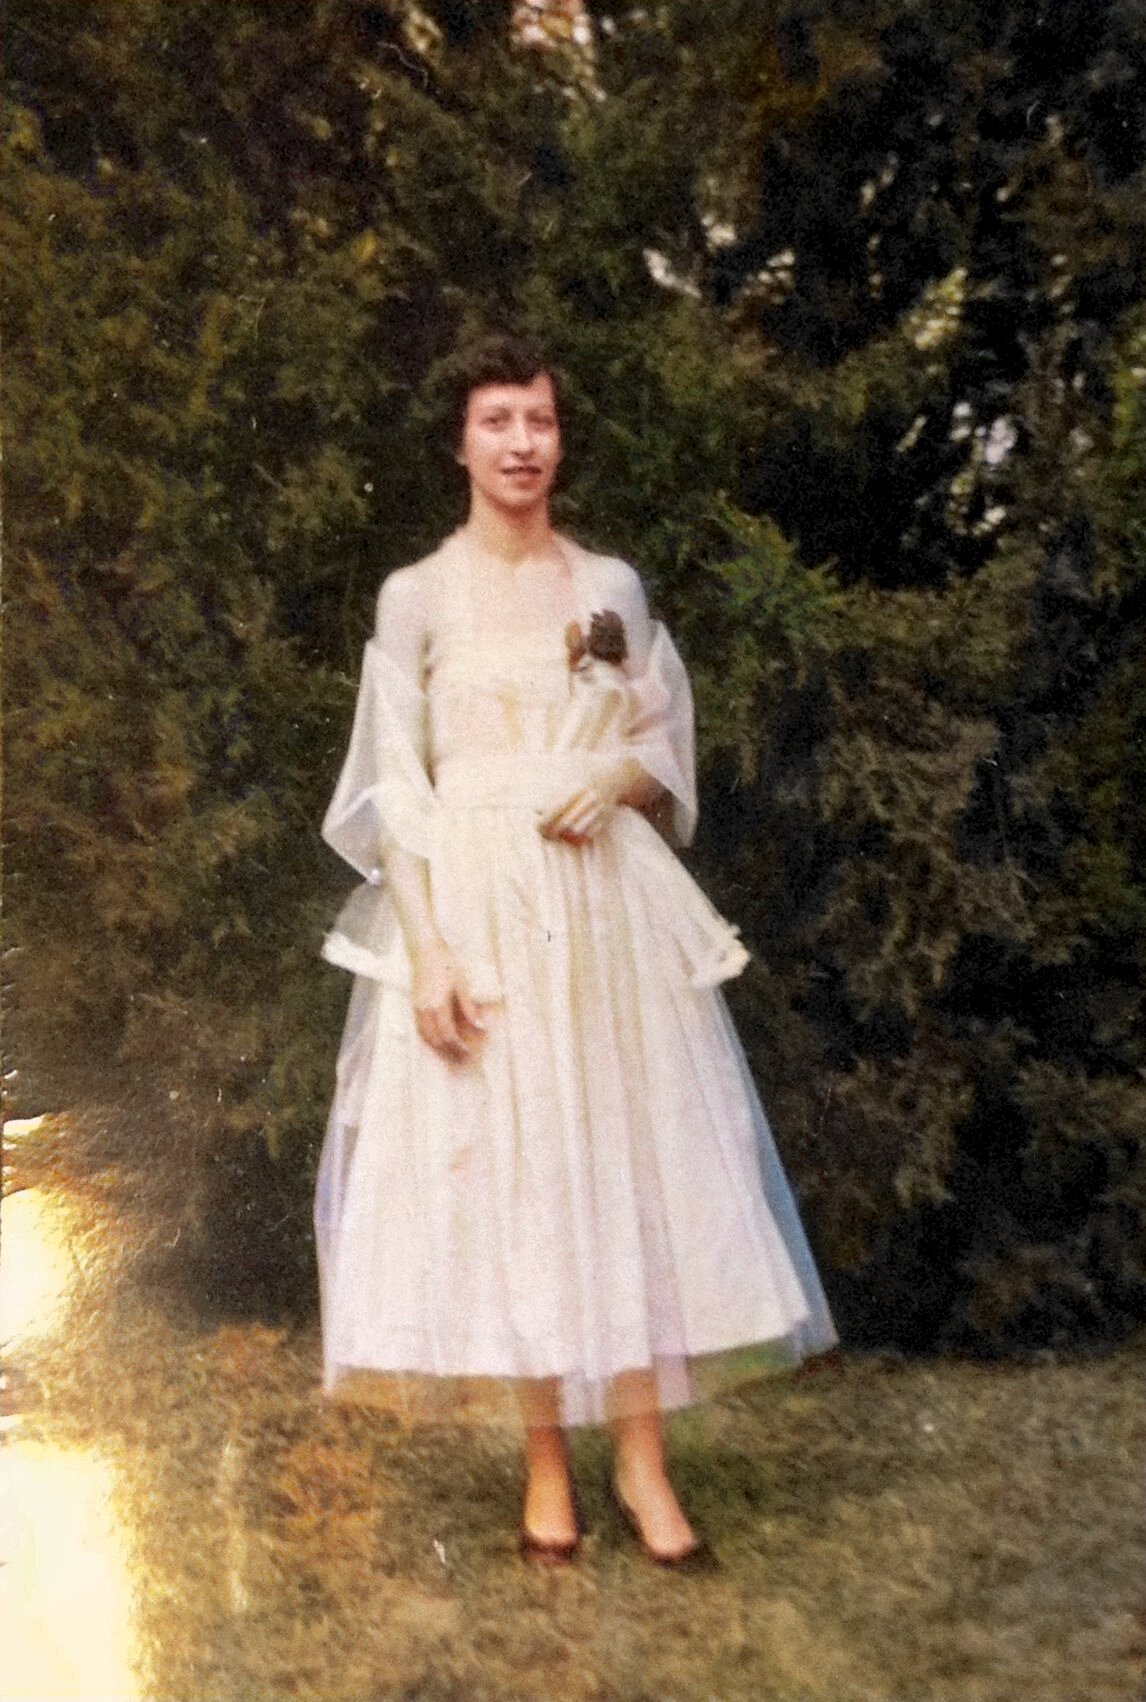 Mama, in the prom dress made by her mother, Macclenny, Fl. ca MY 1953